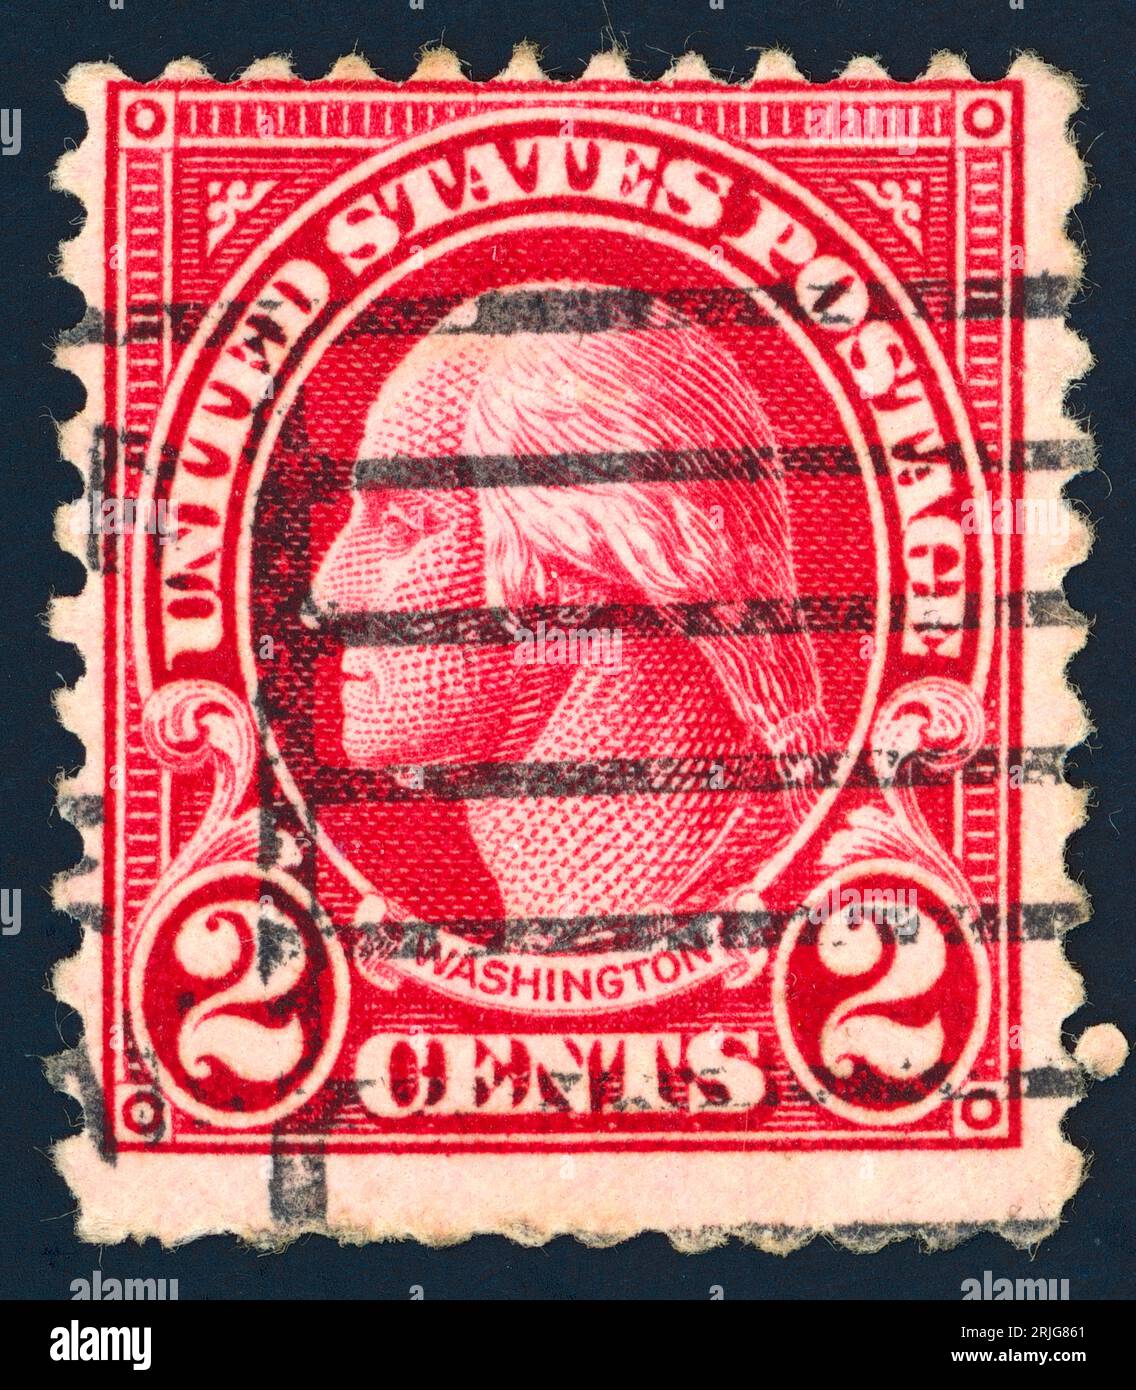 George Washington (1732 – 1799). Postage stamp issued in the US in 1923. George Washington, also called Father of His Country was an American general and commander in chief of the colonial armies in the American Revolution (1775–83) and subsequently first president of the United States (1789–97). Stock Photo